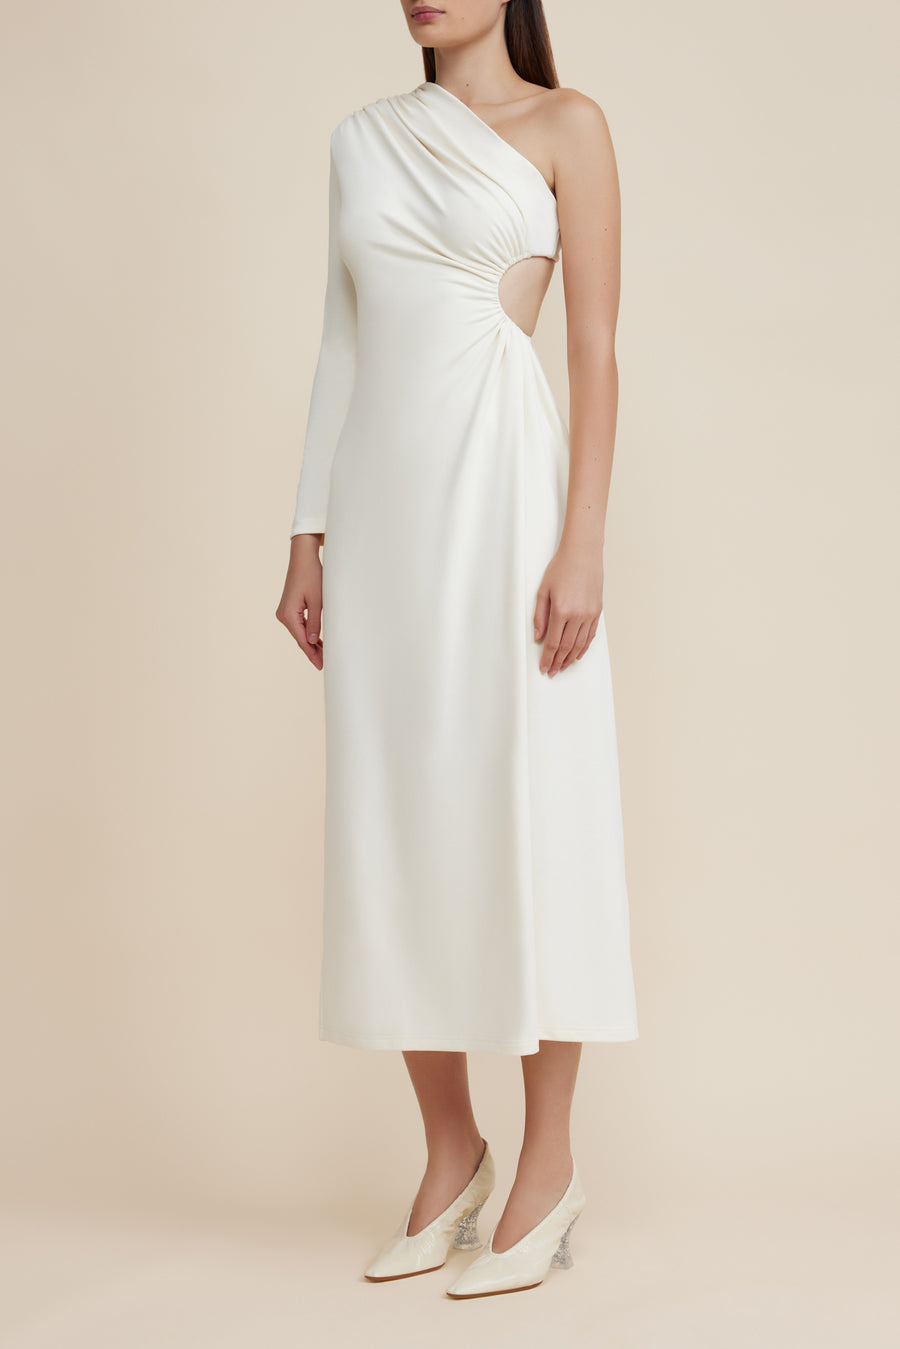 STANMORE DRESS